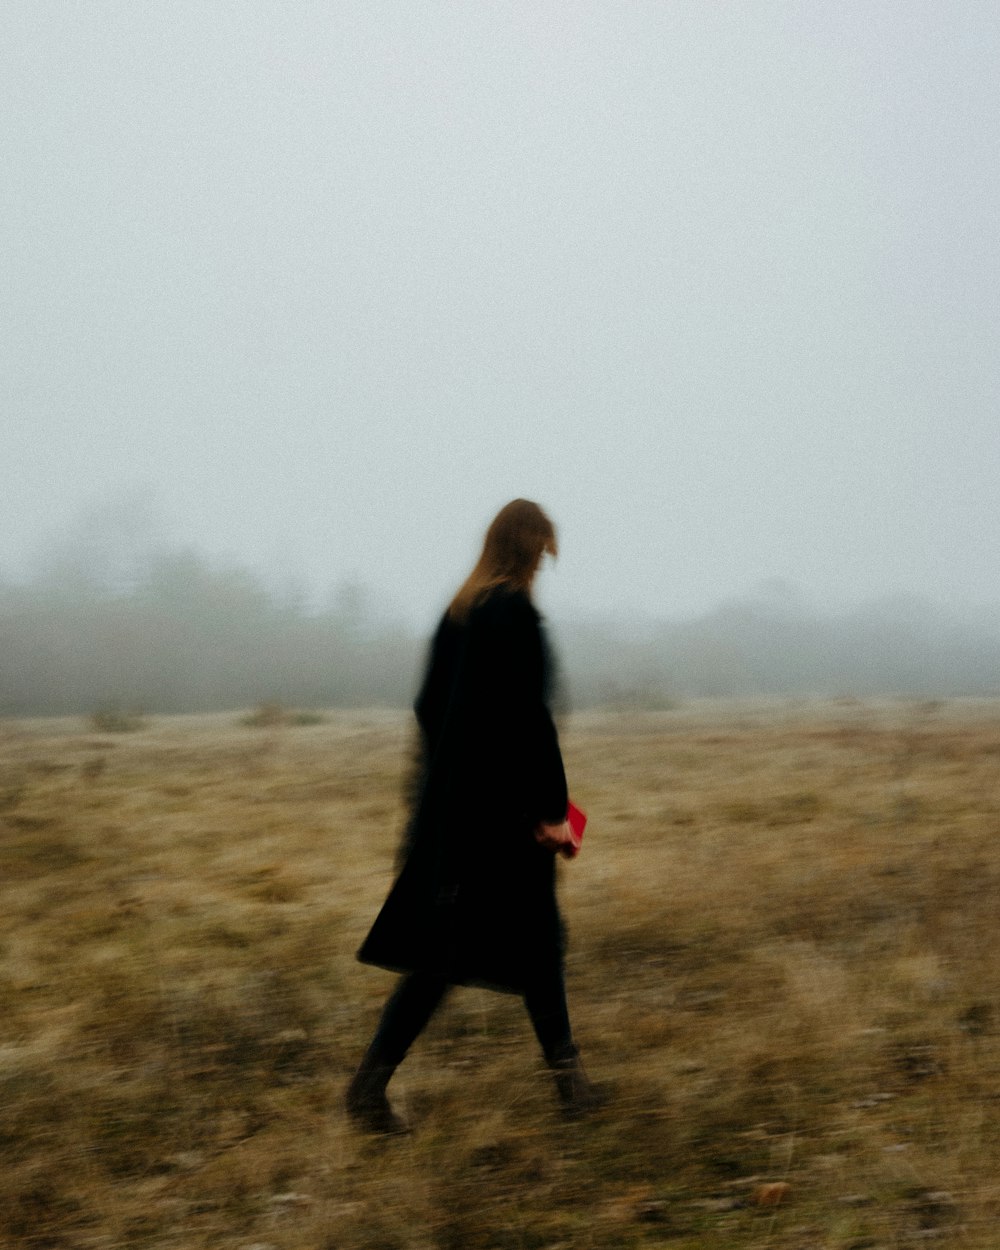 a woman is walking in a field with a kite